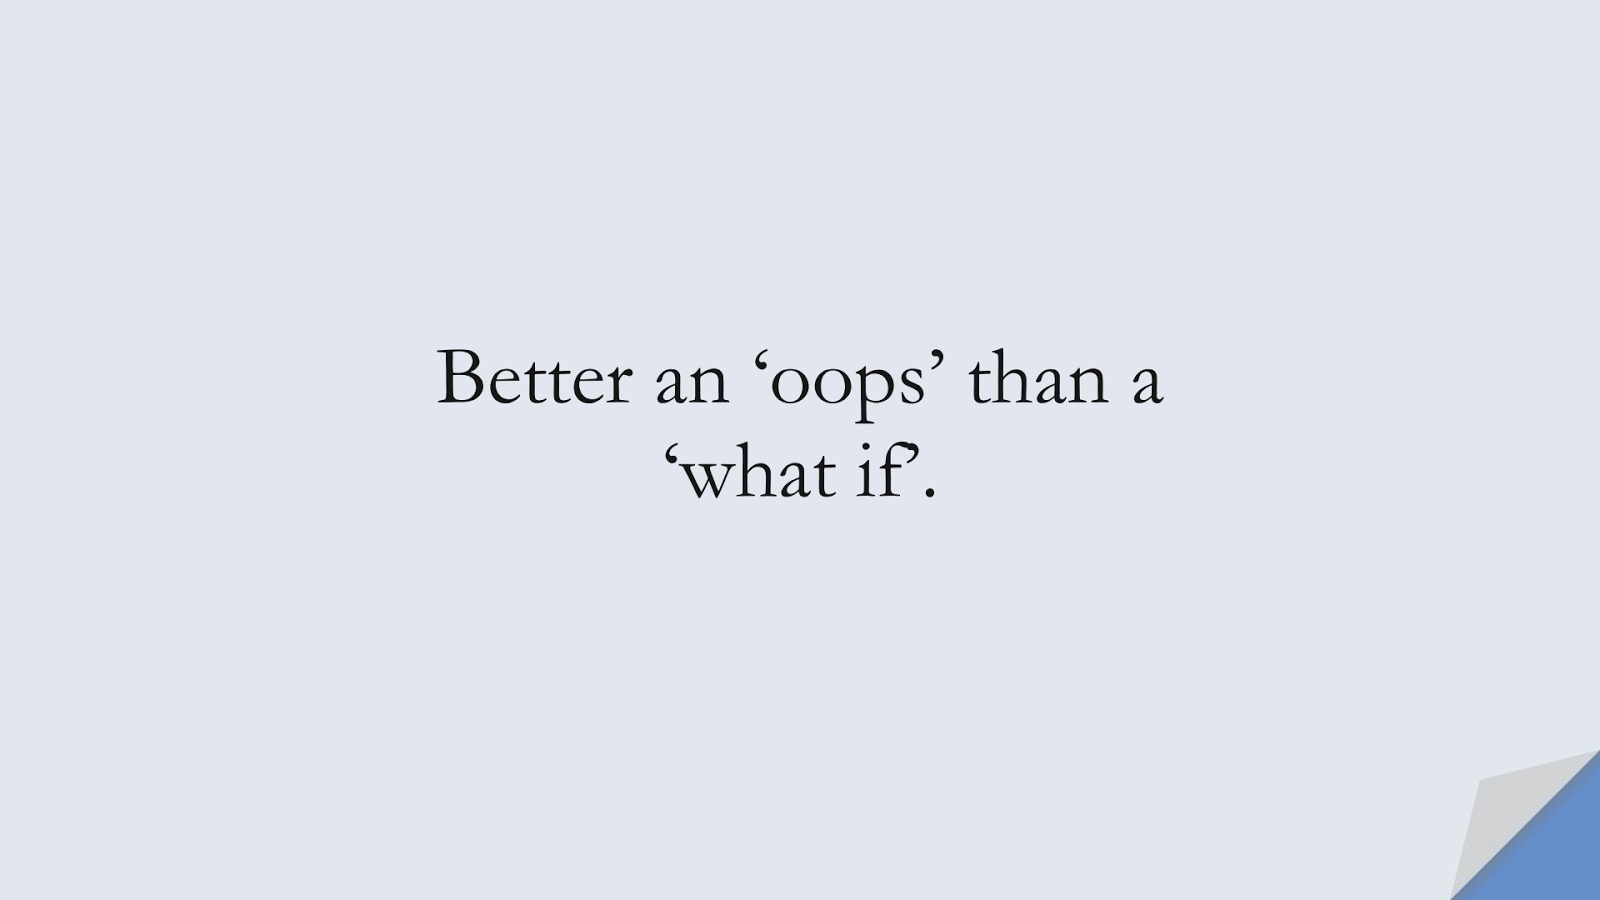 Better an ‘oops’ than a ‘what if’.FALSE